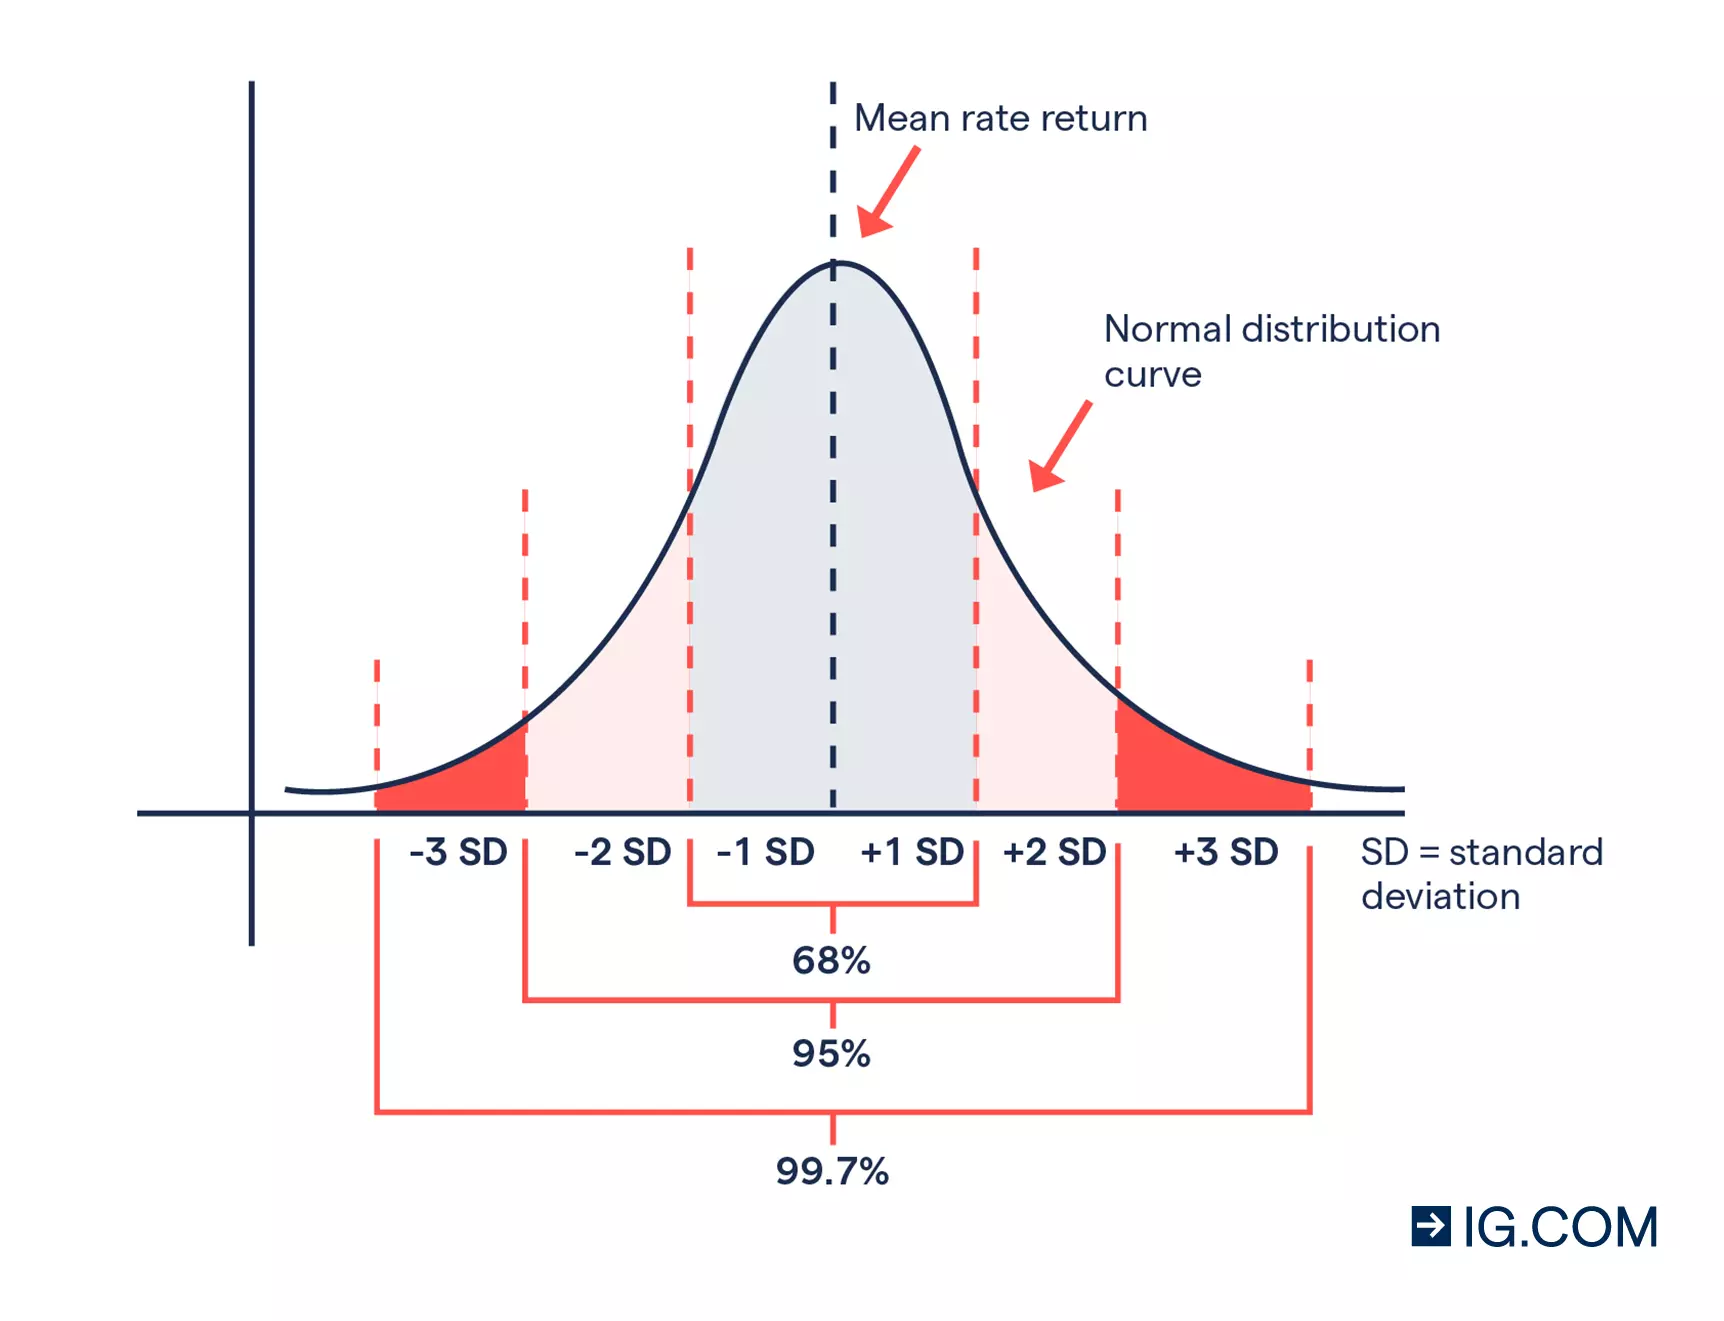 A bell-shaped curve showing a normal distribution of rates of return, where 68% percent of all returns occur within 1 standard deviation of the mean